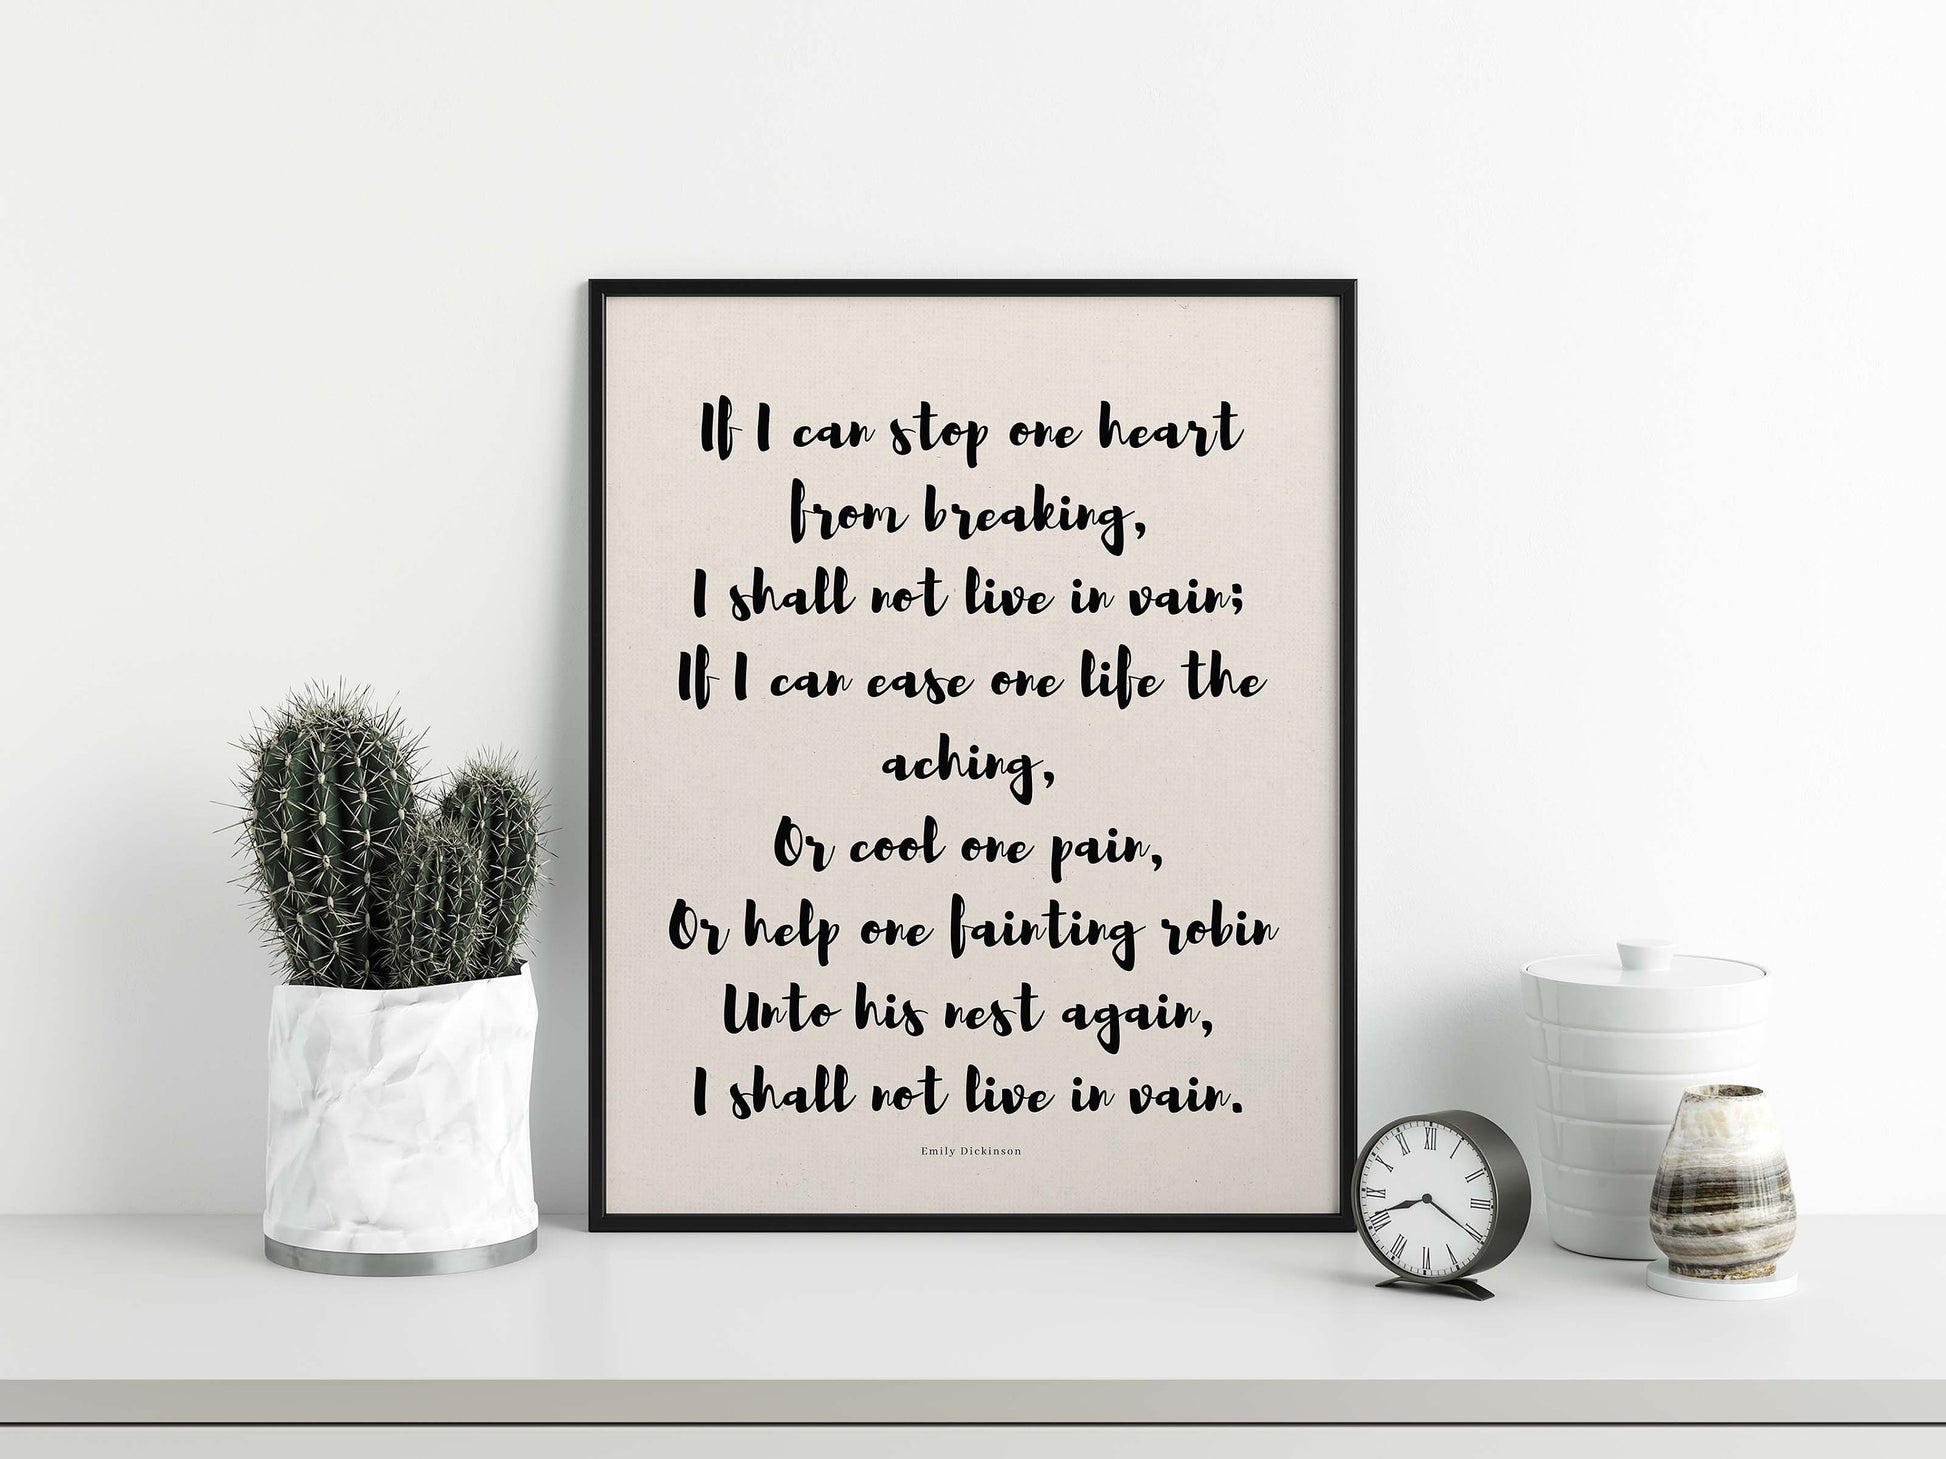 Emily Dickinson&#39;s &#39;If I Can Stop One Heart From Breaking&#39; poem print in black frame display